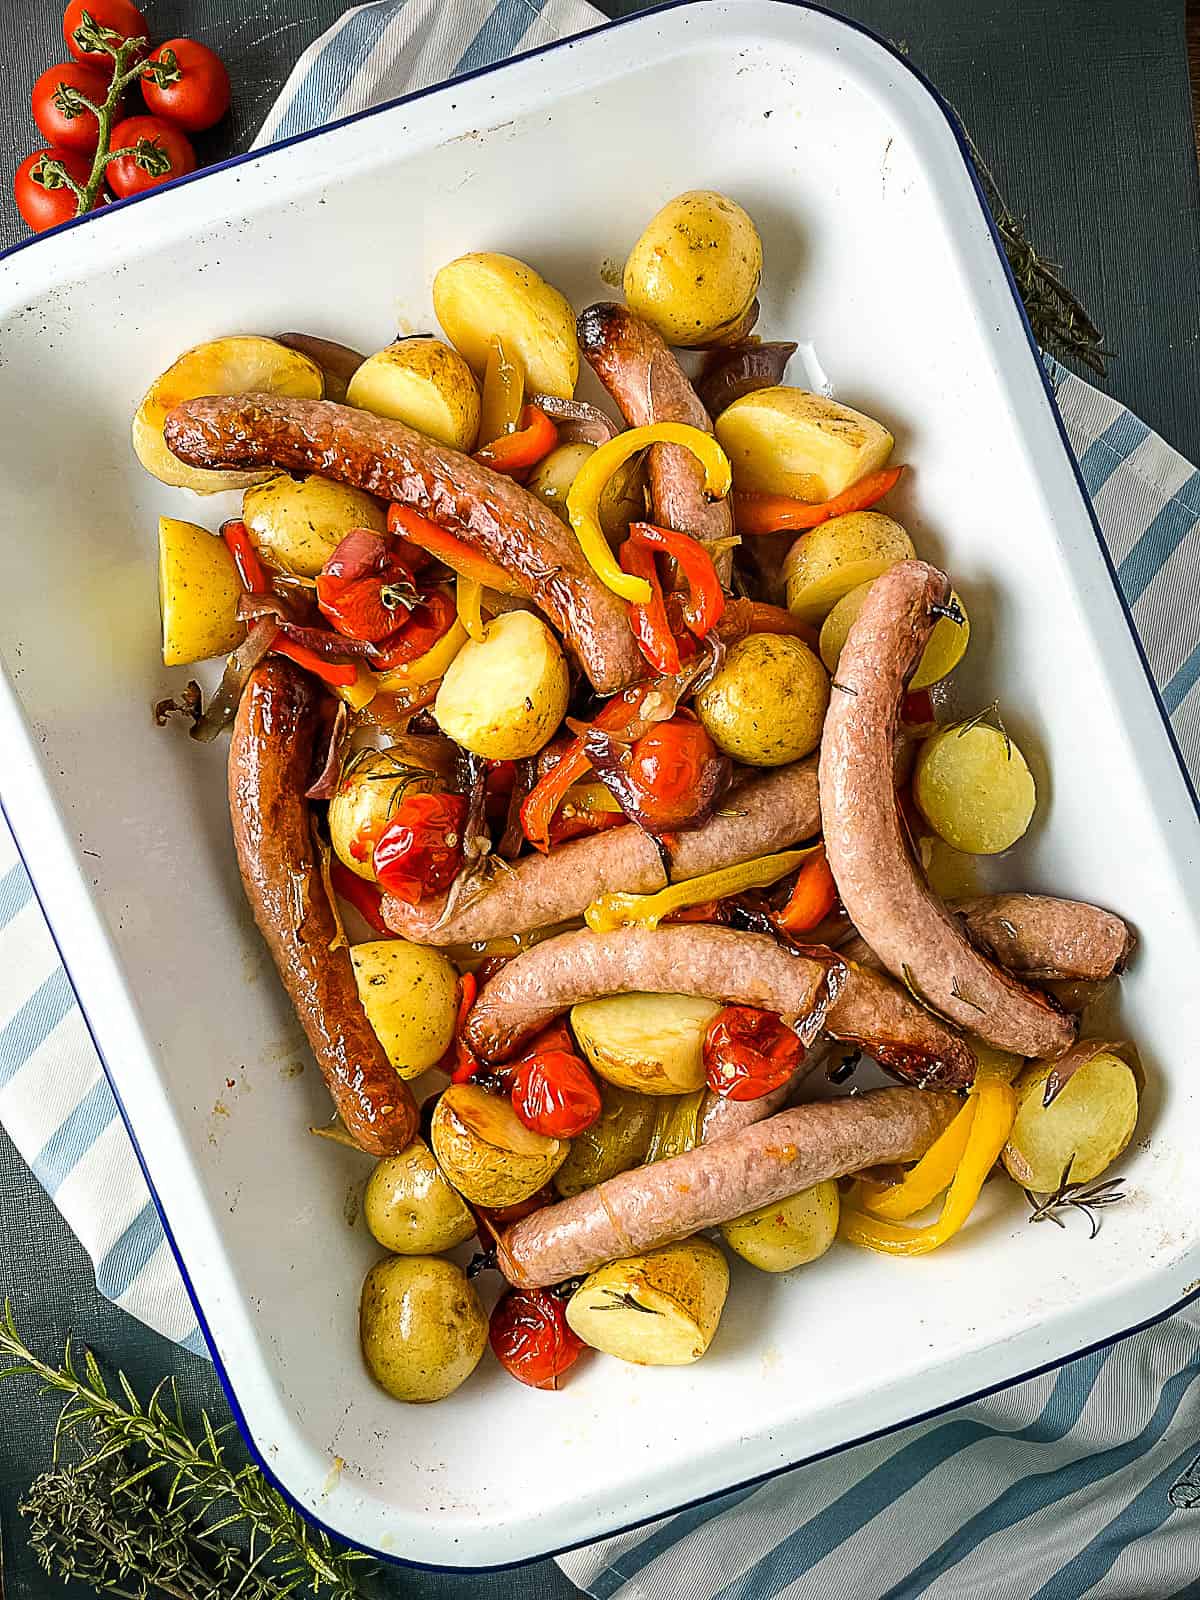 sticky sausage tray bake cooked with potatoes peppers and tomatoes